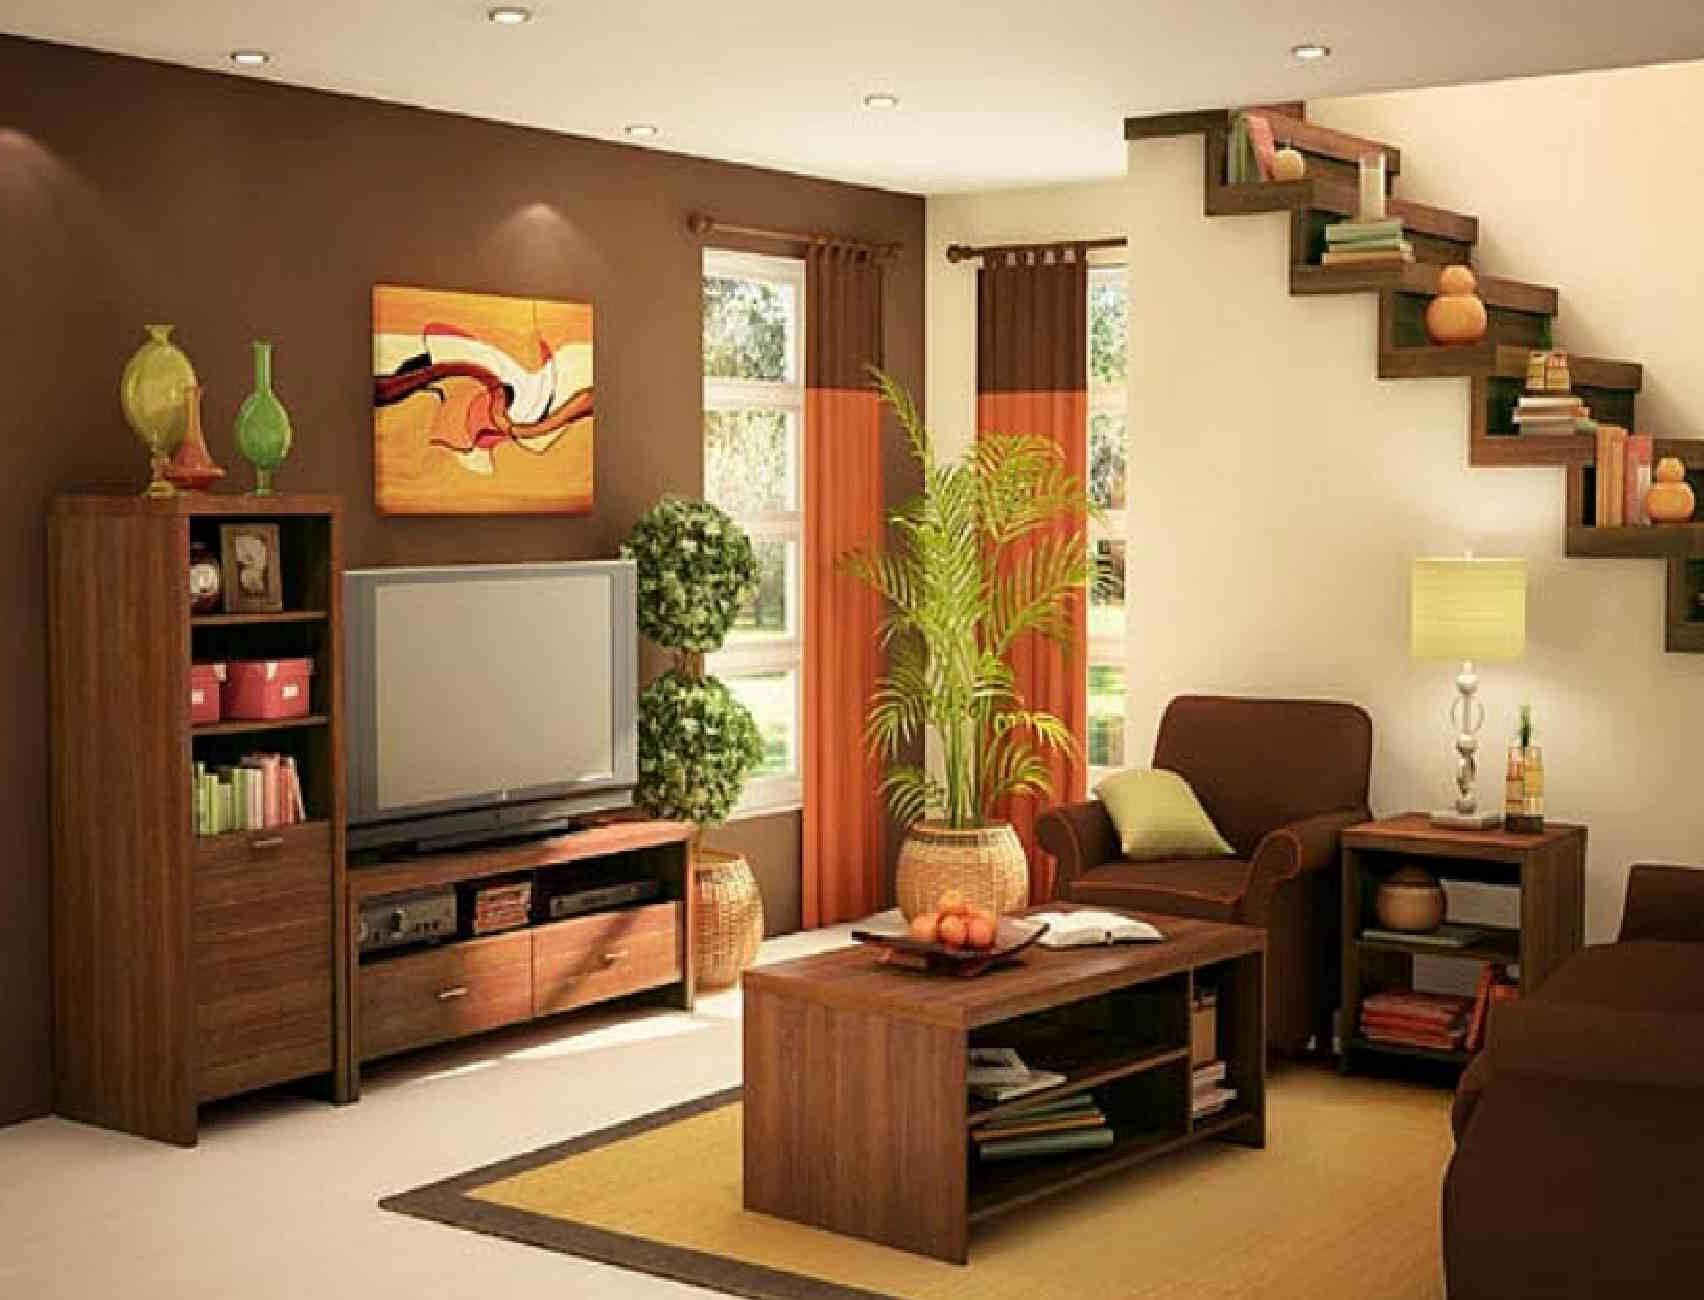 Attractive Interior Designs For Small Houses In the Philippines | Live ...